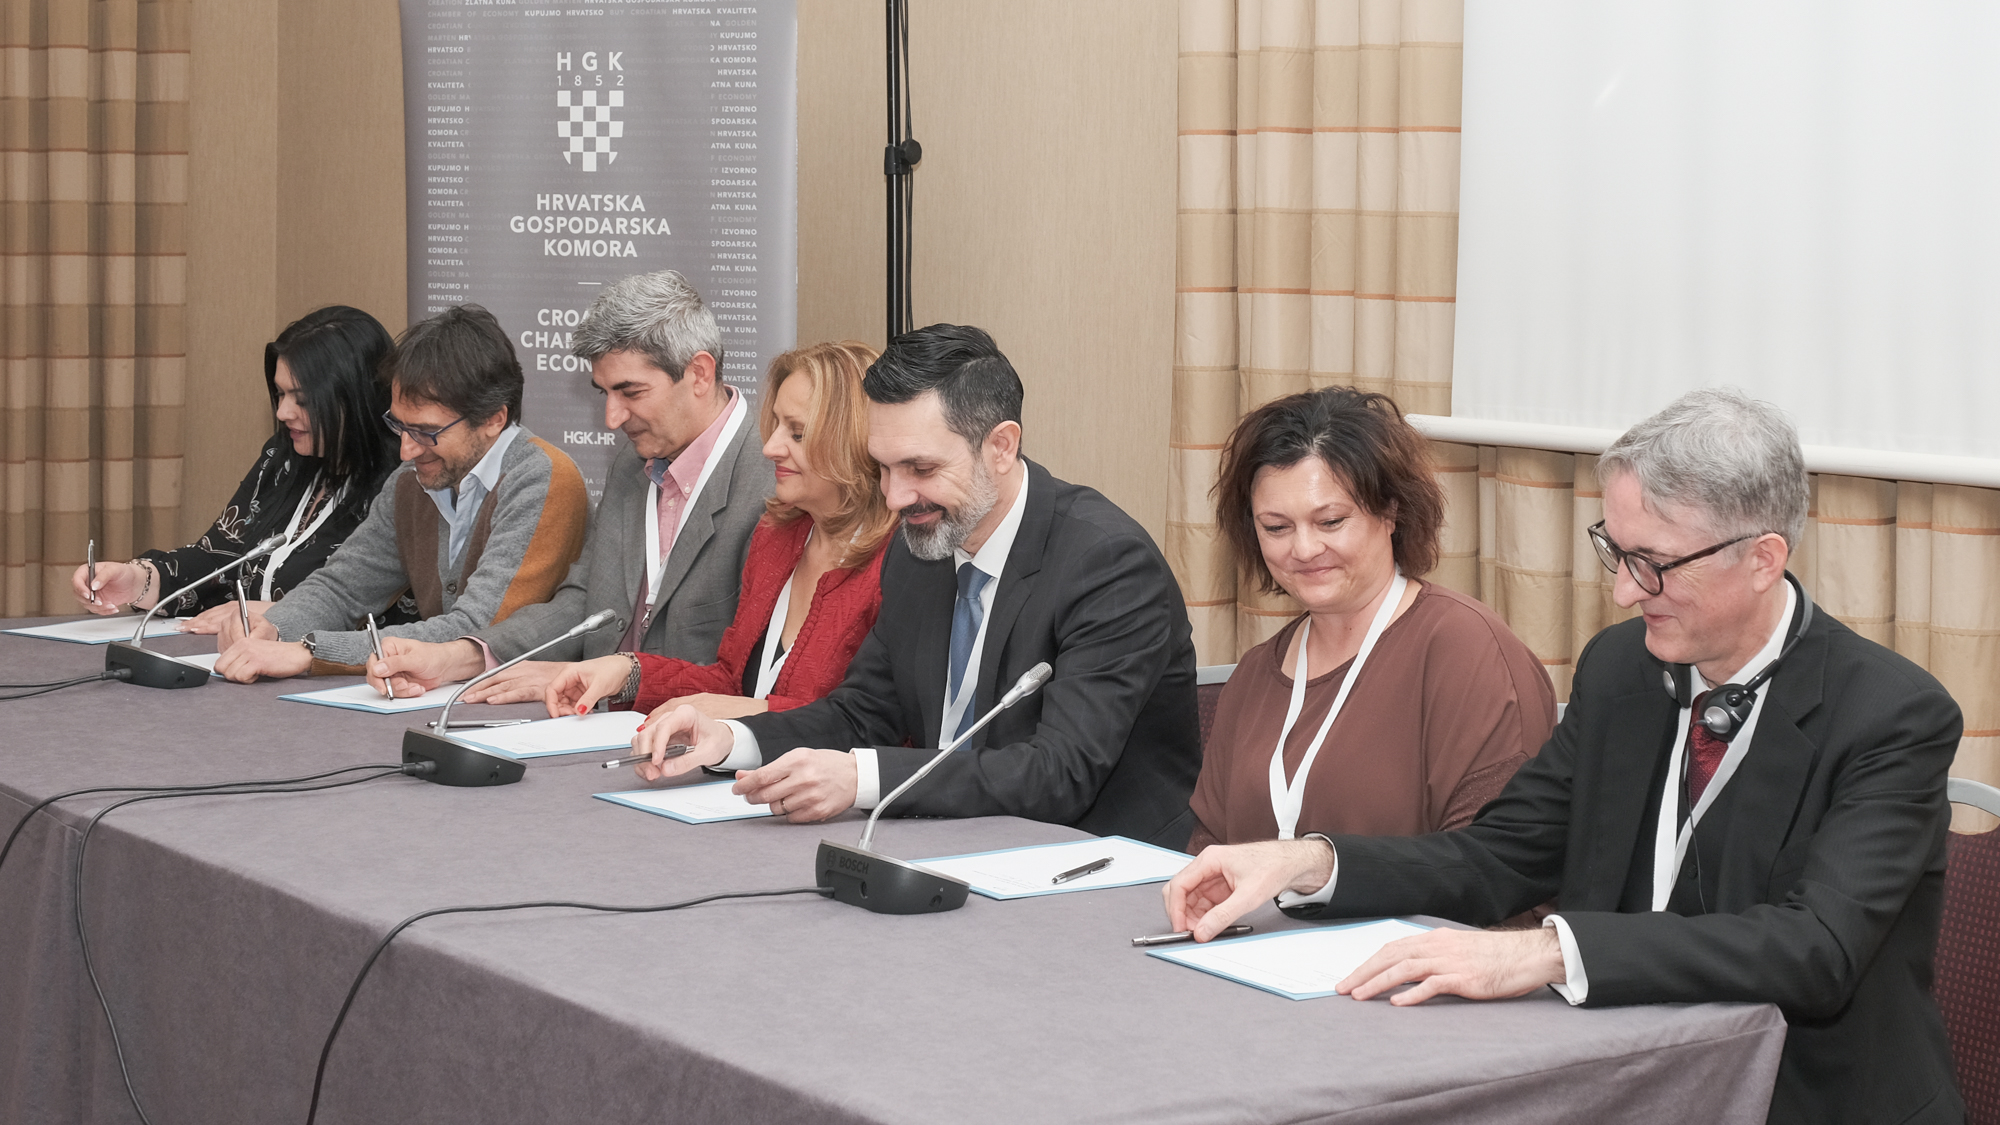 Signed the OIS-AIR Manifesto aimed to establishment of a collaborative Network for boosting transnational cooperation in the field of innovation in the Adriatic-Ionian region